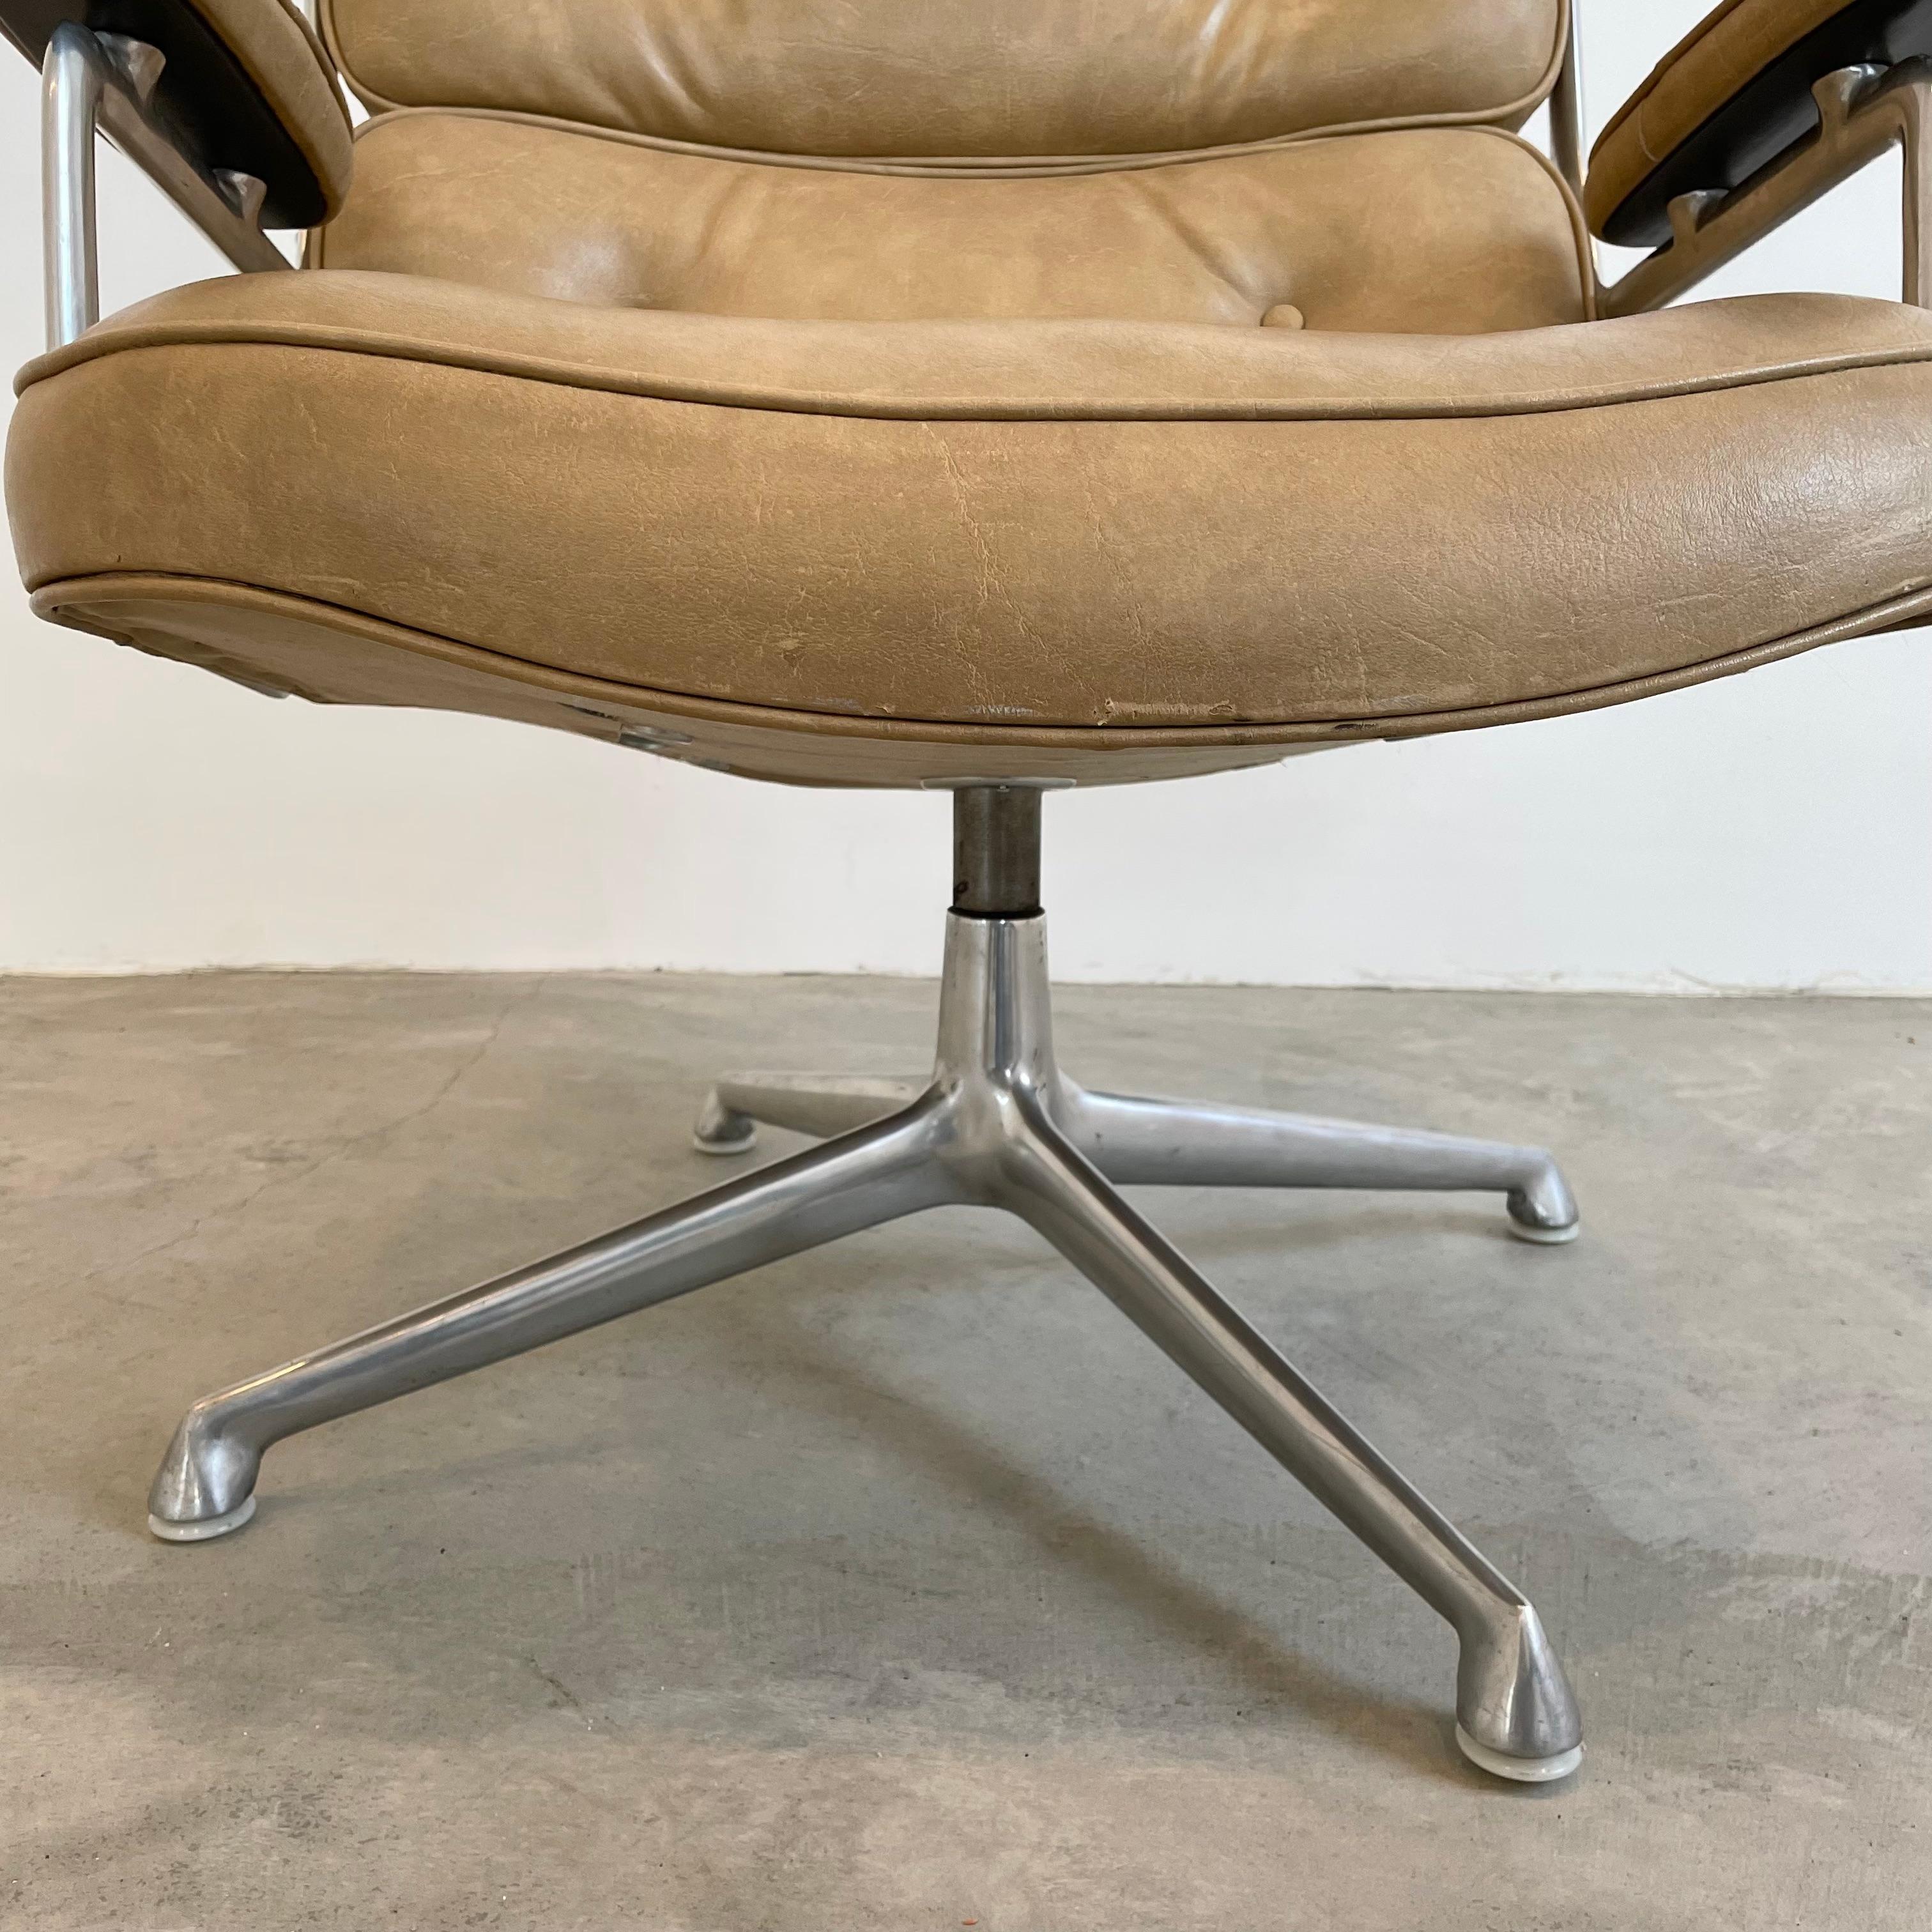 Vintage Eames Time Life Lobby Chair in Camel 5